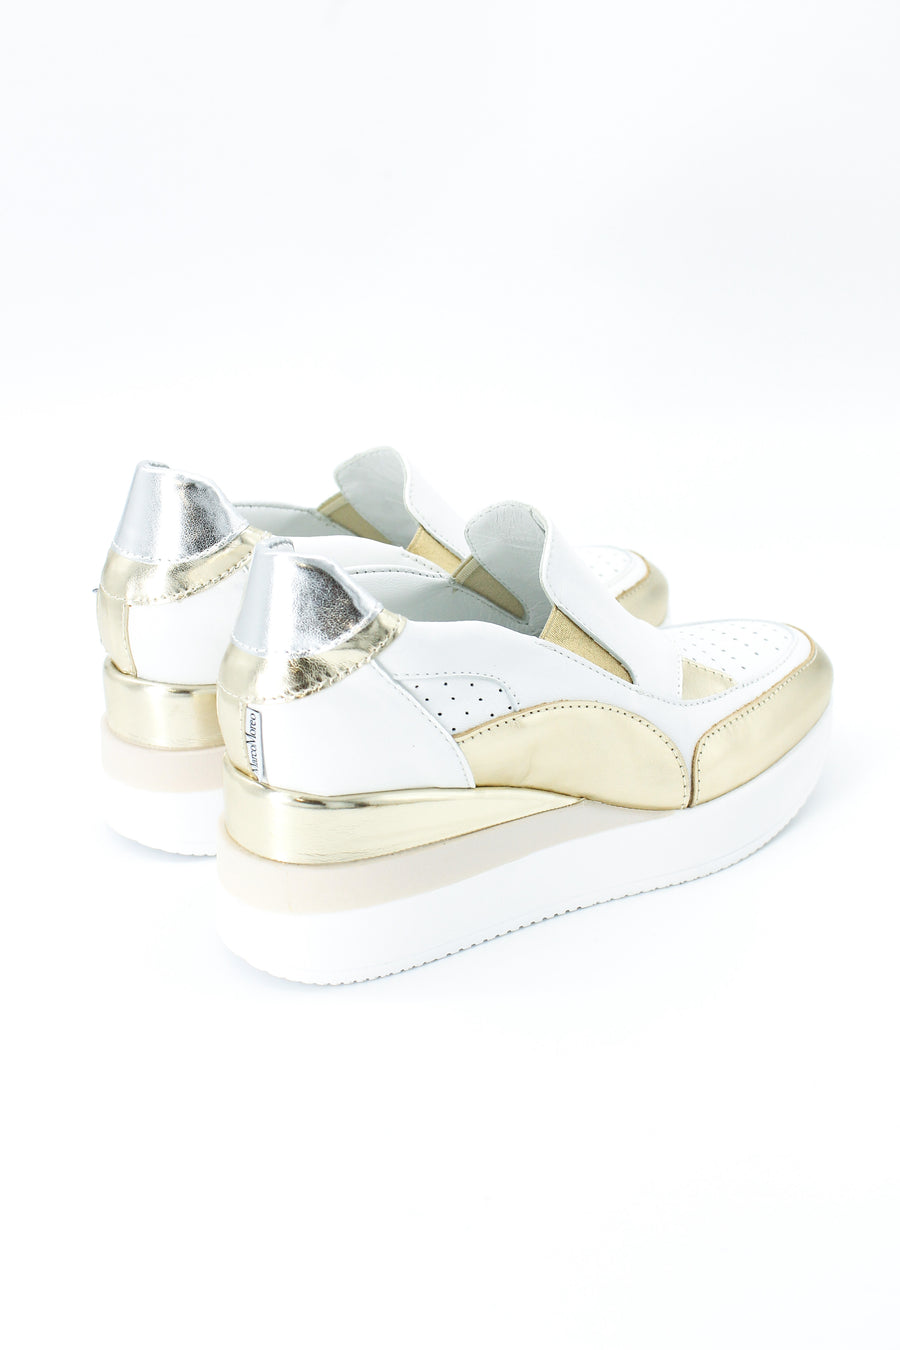 Marco Moreo 3010 White and Gold